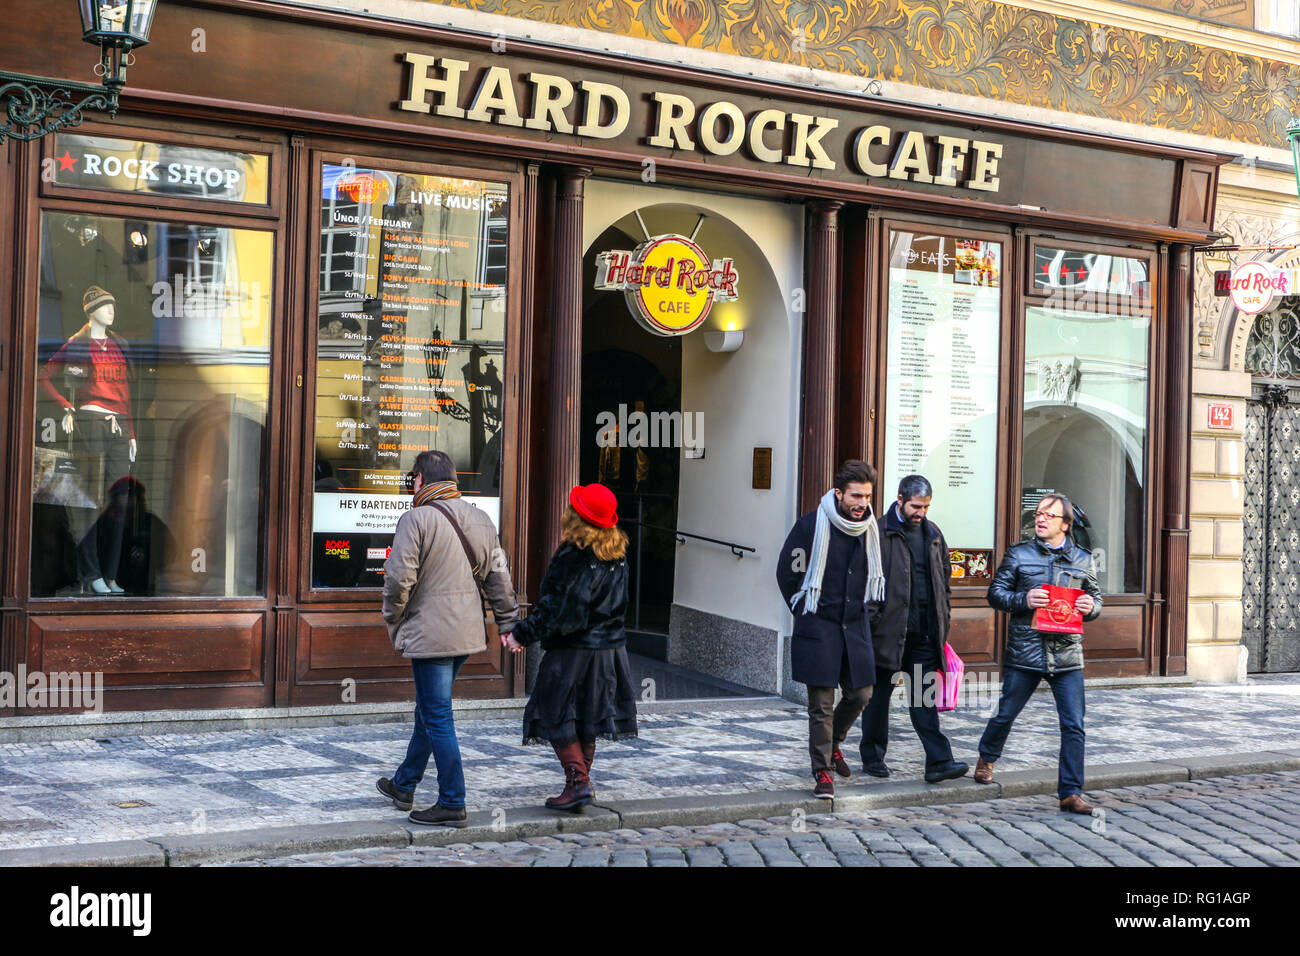 Tourists in front of famous bar Hard Rock Cafe on Male Namesti Square, Prague Old Town Little Square Czech Republic Stock Photo